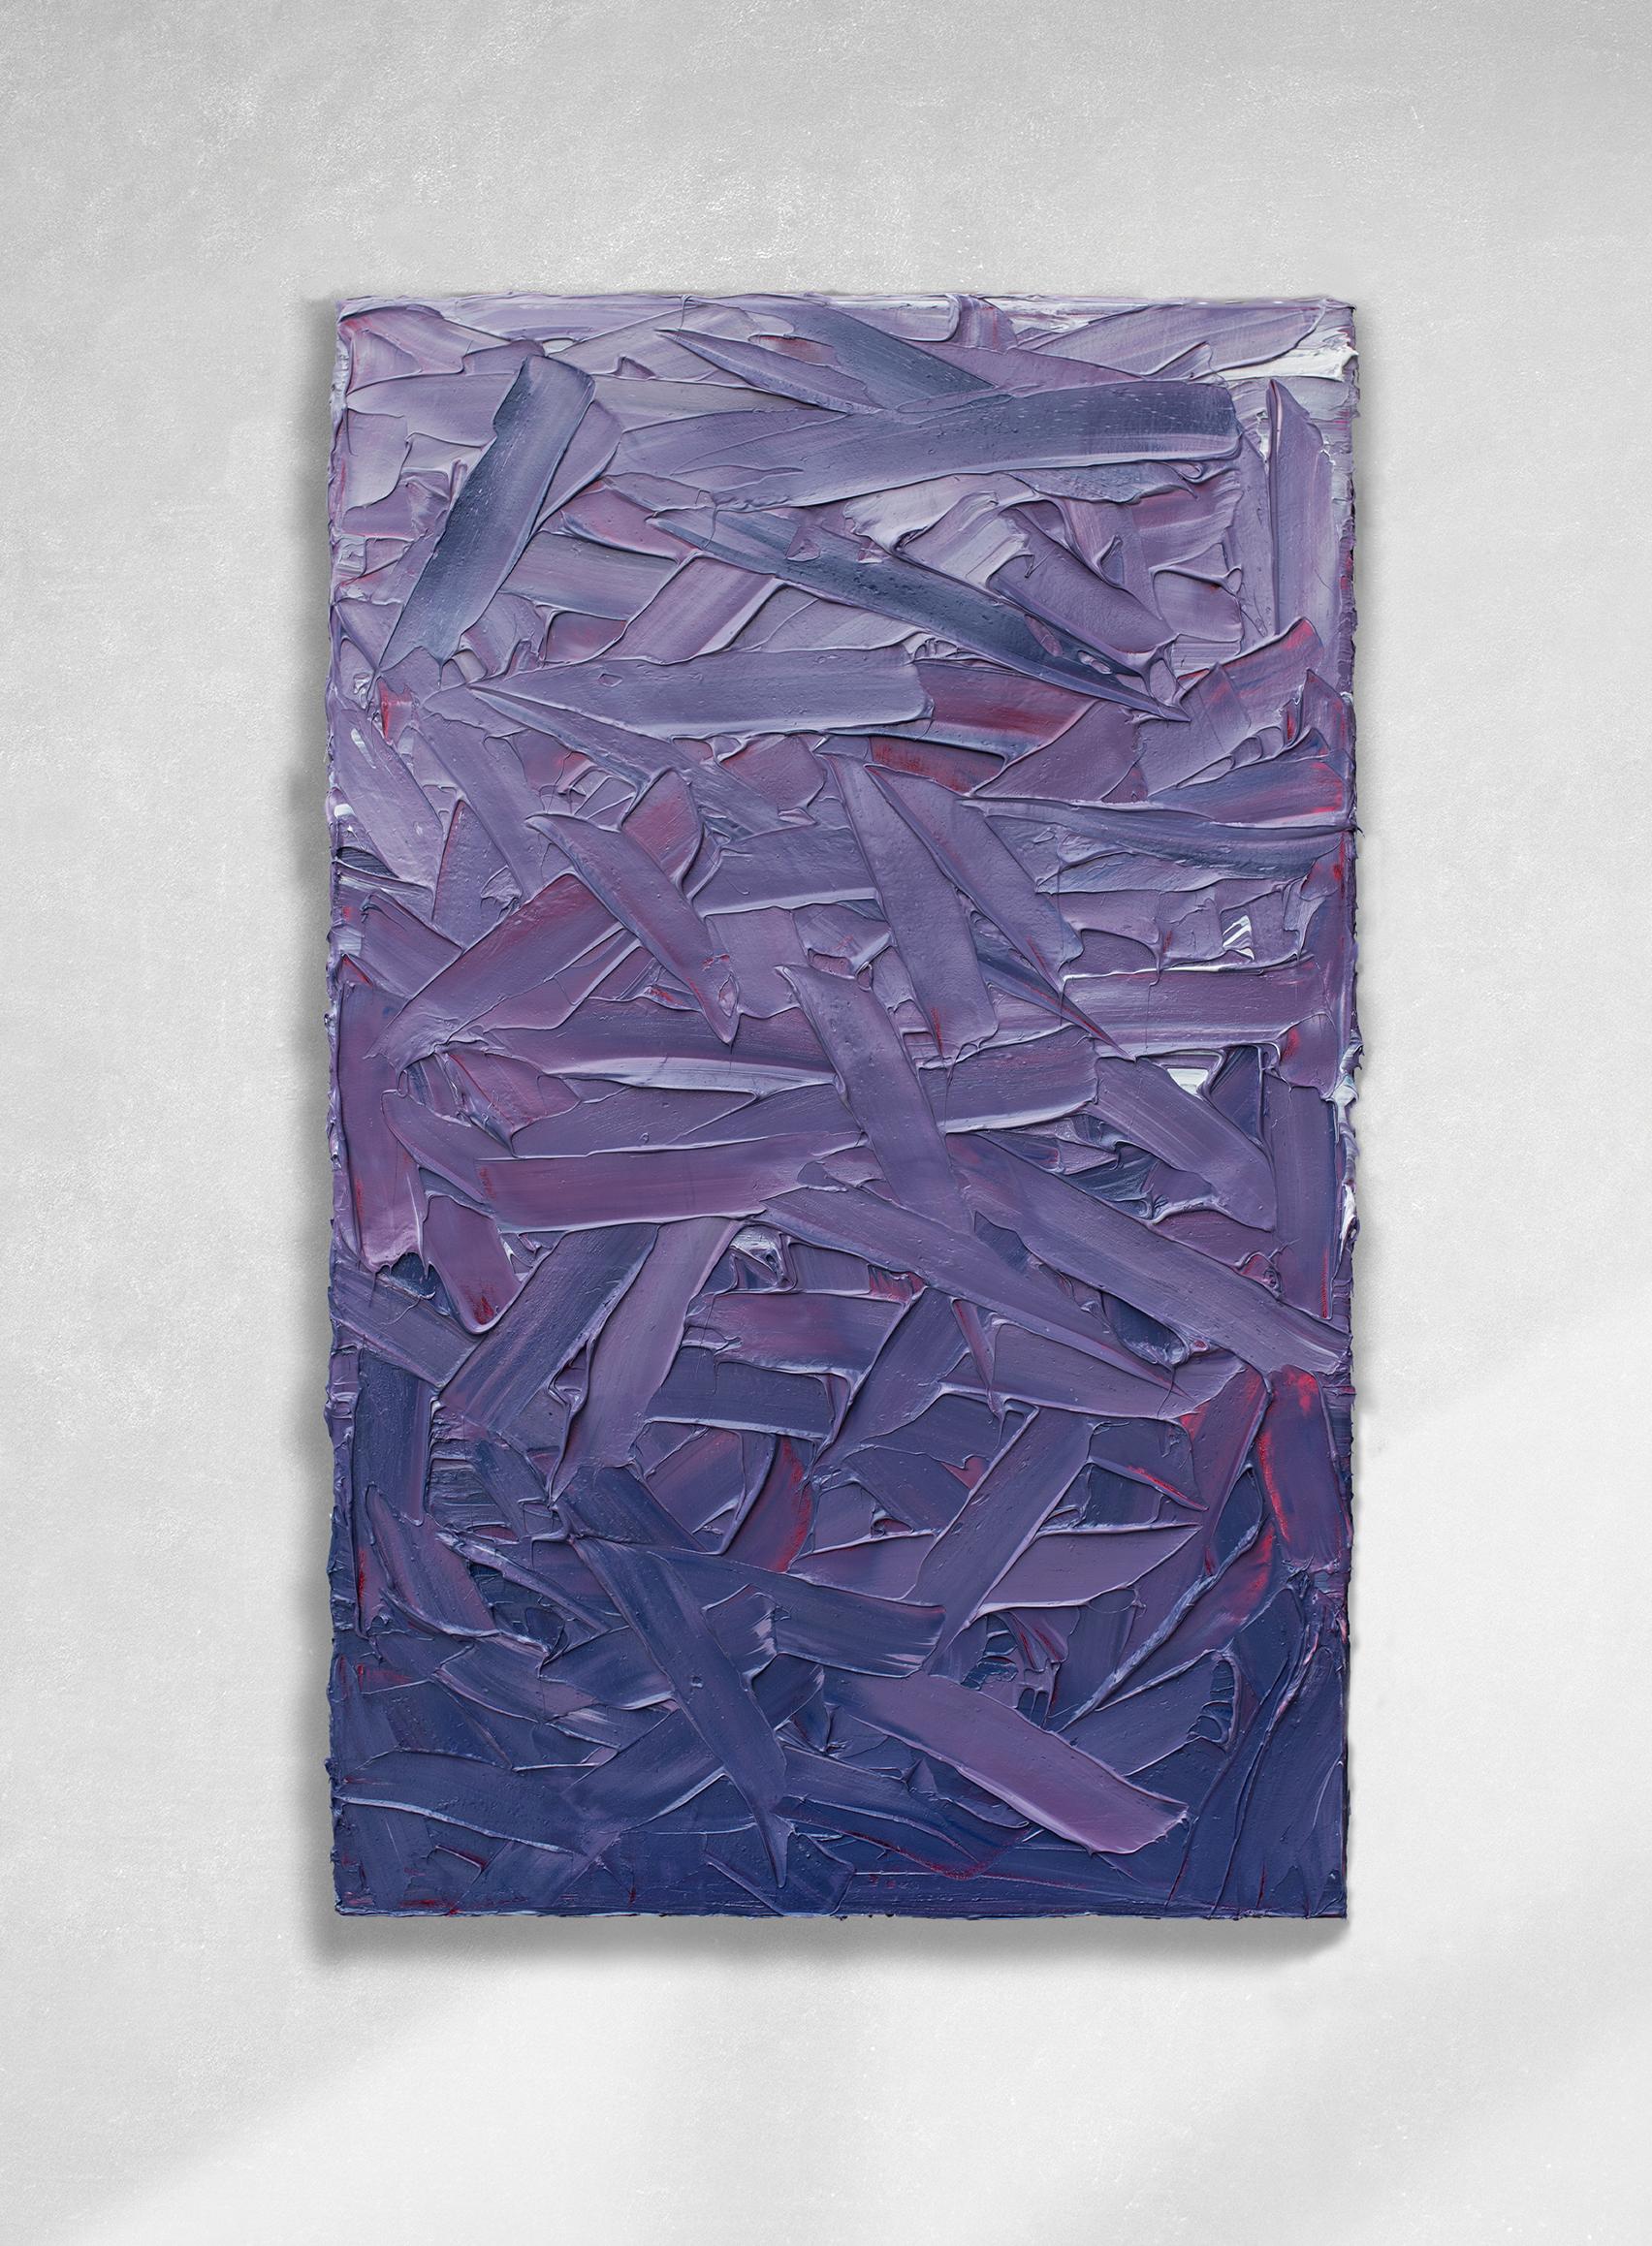 Teodora Guererra Abstract Sculpture - "Royal Whip" Abstract Painting